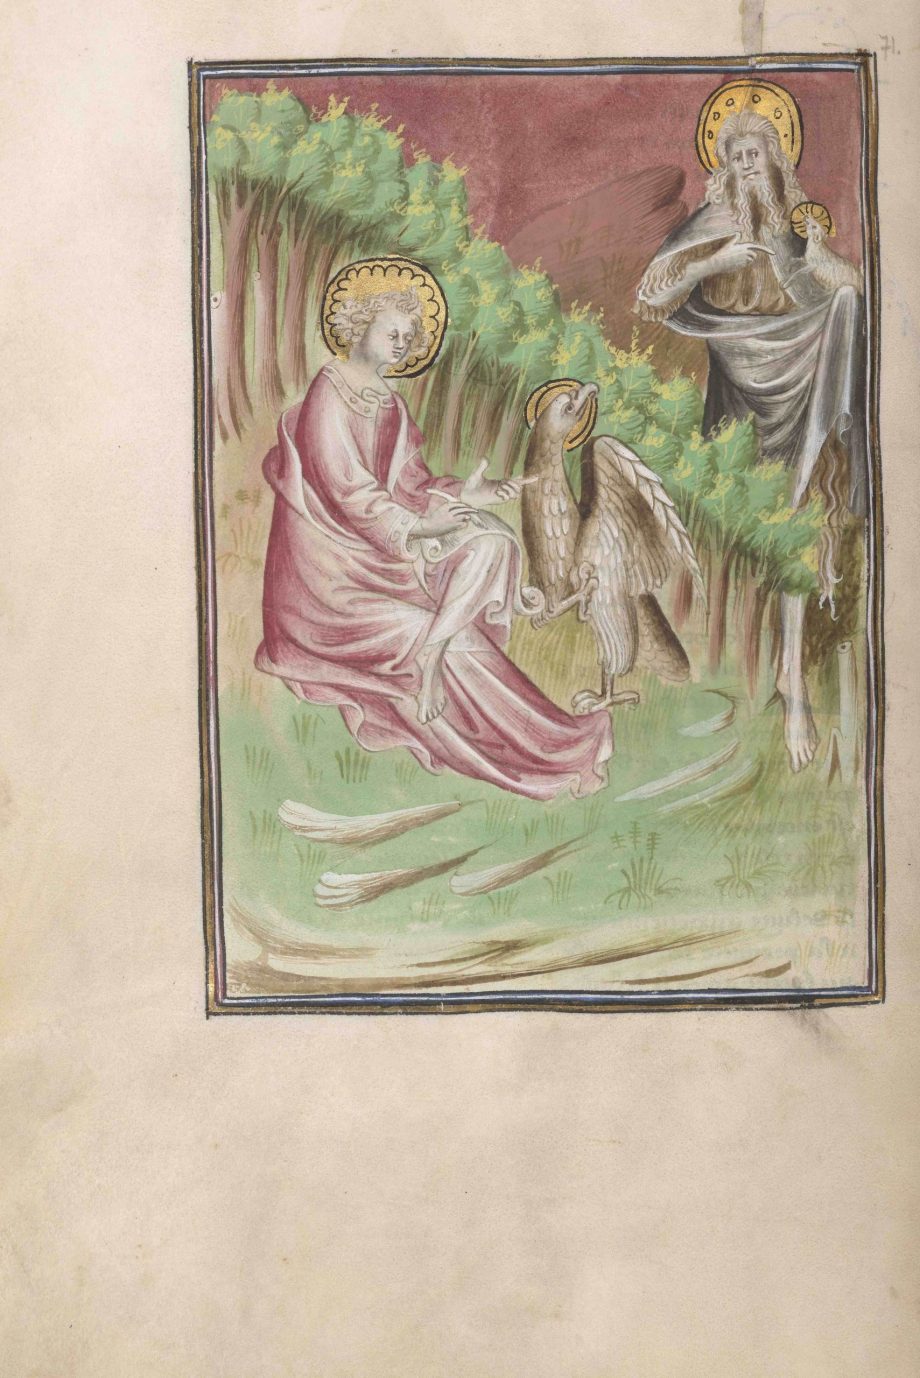 Folio 71 verso showing John the Evangelist and John the Baptist from The Morgan Library & Museum in New York, MS M.133; Paris, around 1410